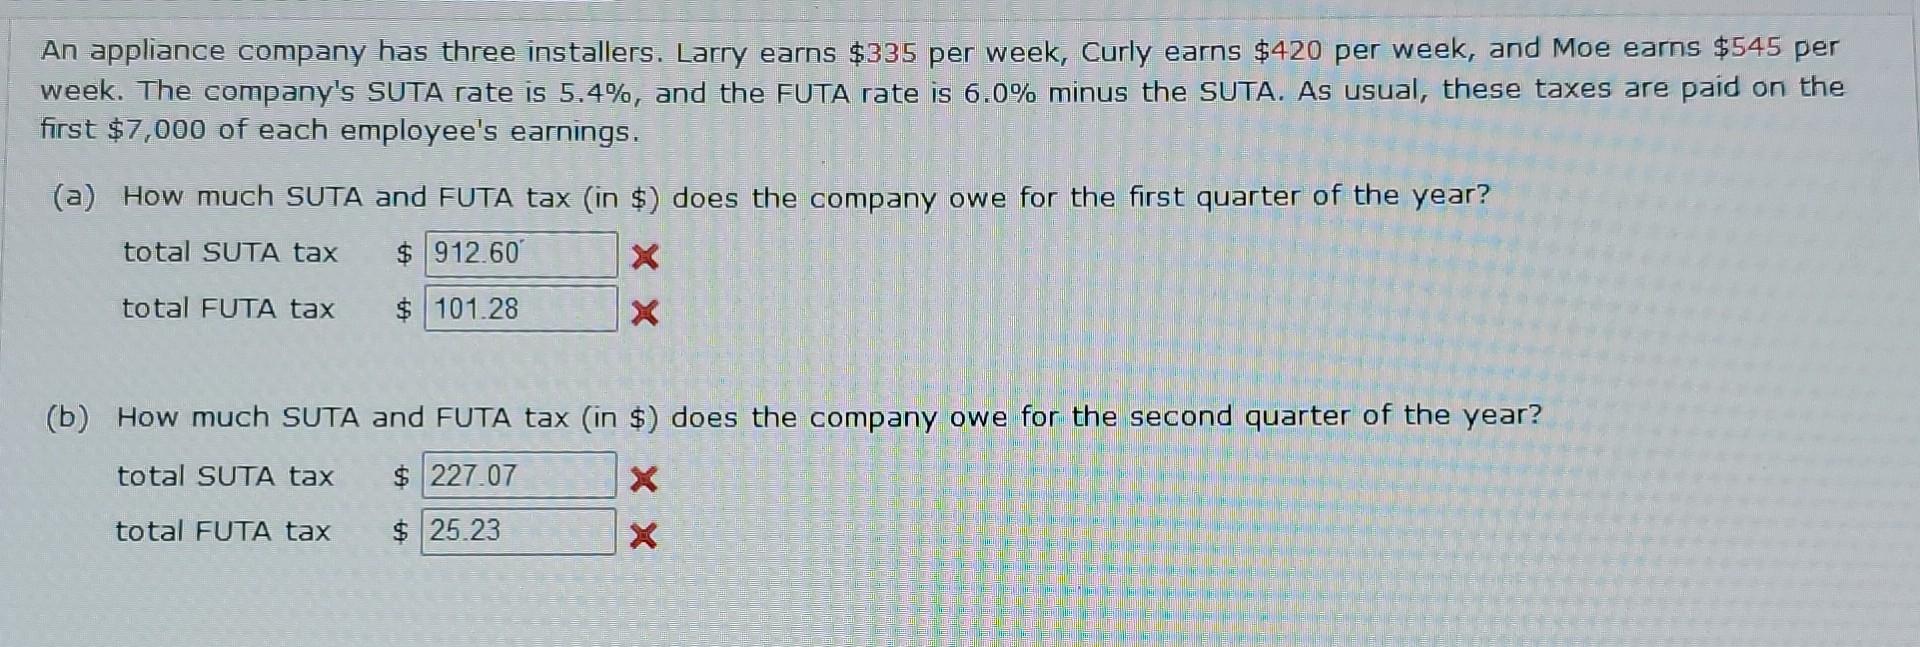 An appliance company has three installers. Larry earns $335 per week, Curly earns $420 per week, and Moe